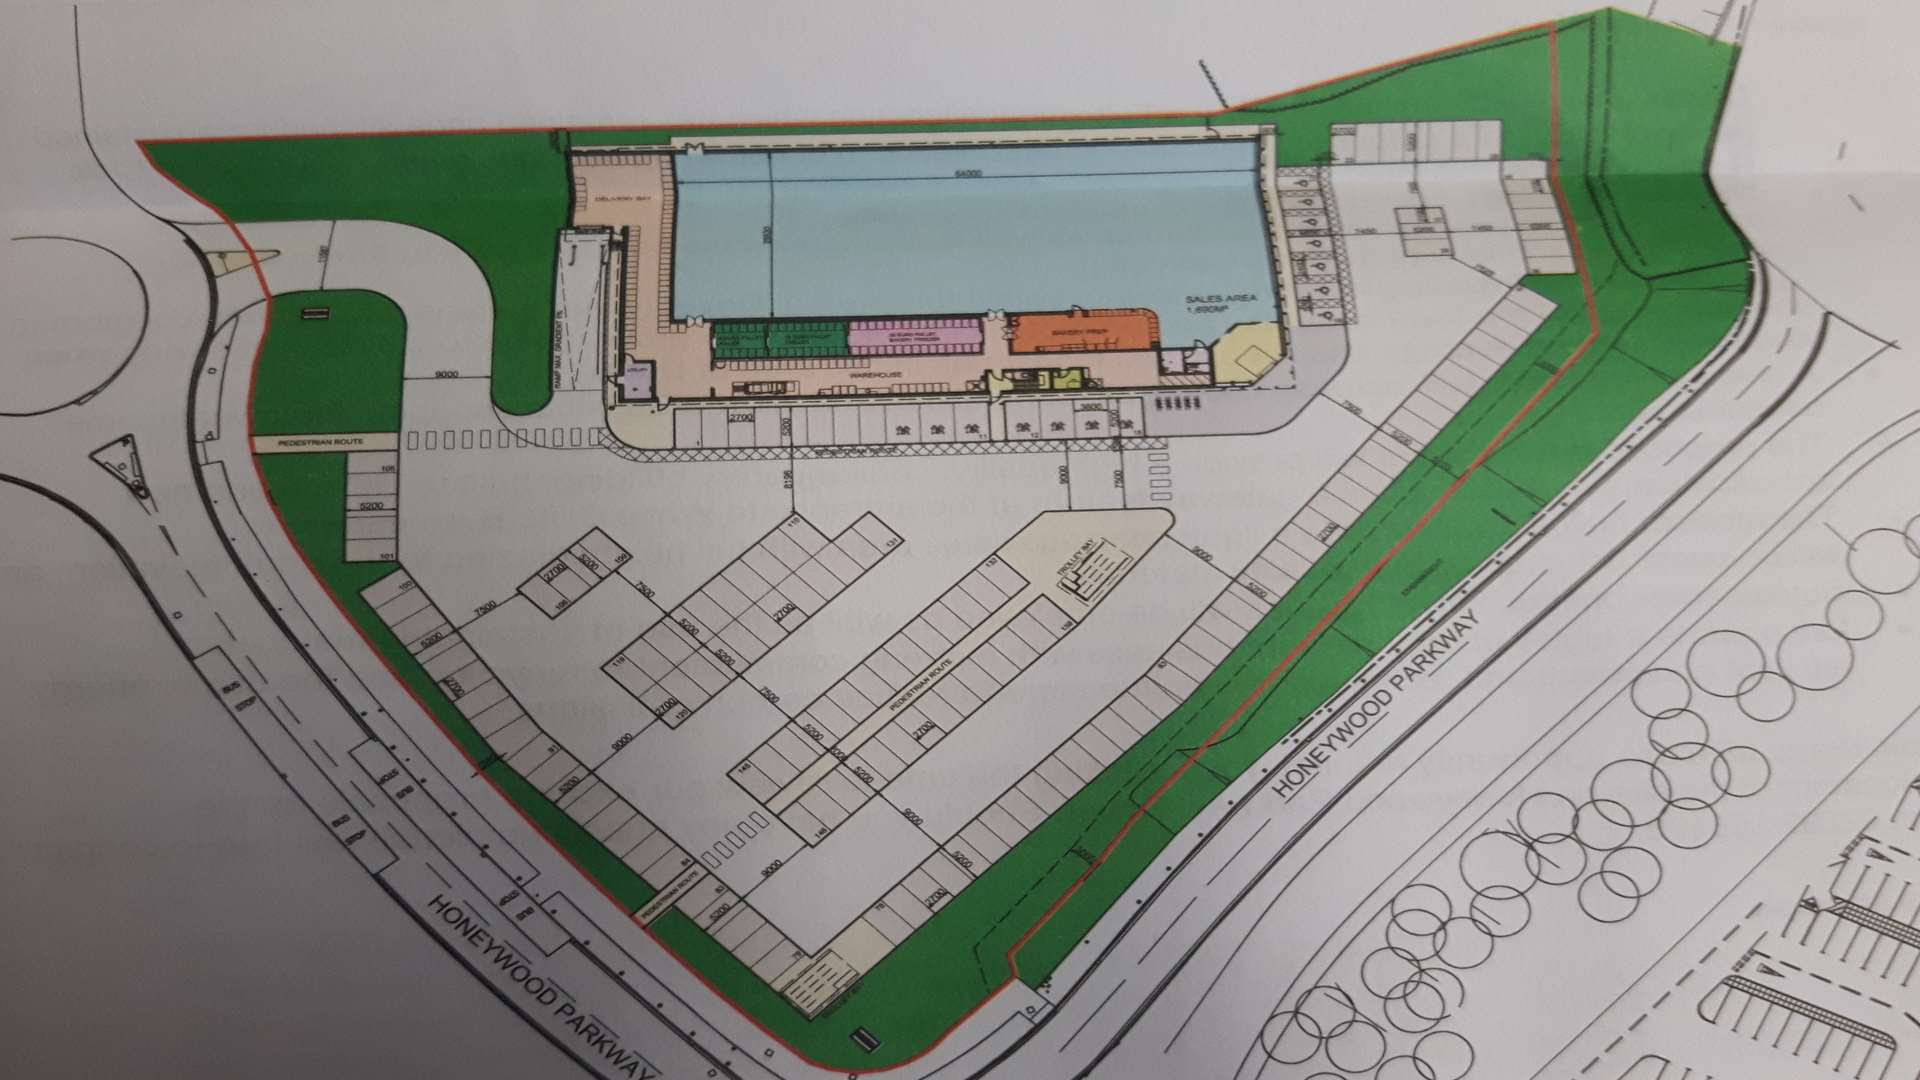 Map showing the setting for the new Lidl proposed for White Cliffs Business Park, Dover